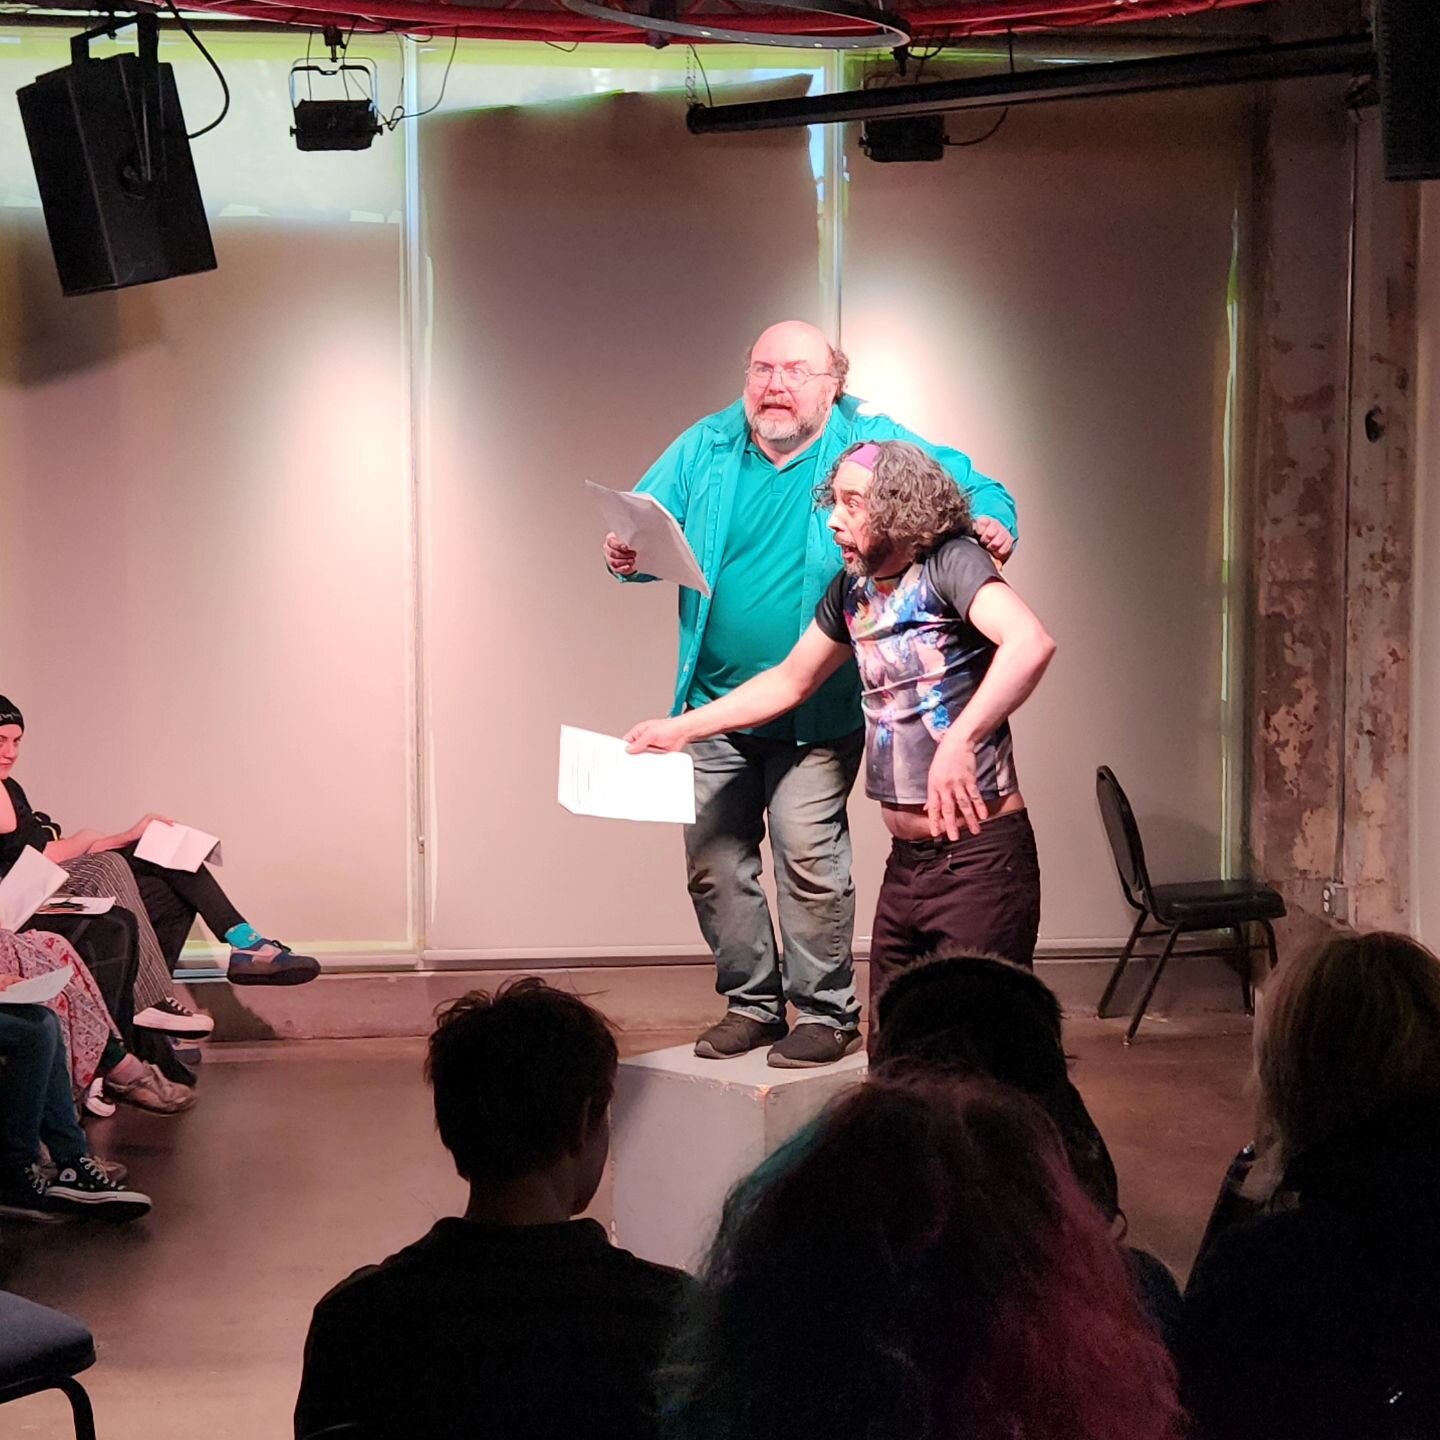 Workshop performance day at @kickstandcomedy with our student writer group from @mtscottlc

It's a special kind of experience to watch our writers' stories come to life at the conclusion of a PlayWrite, Inc workshop.

We will be showcasing some of th